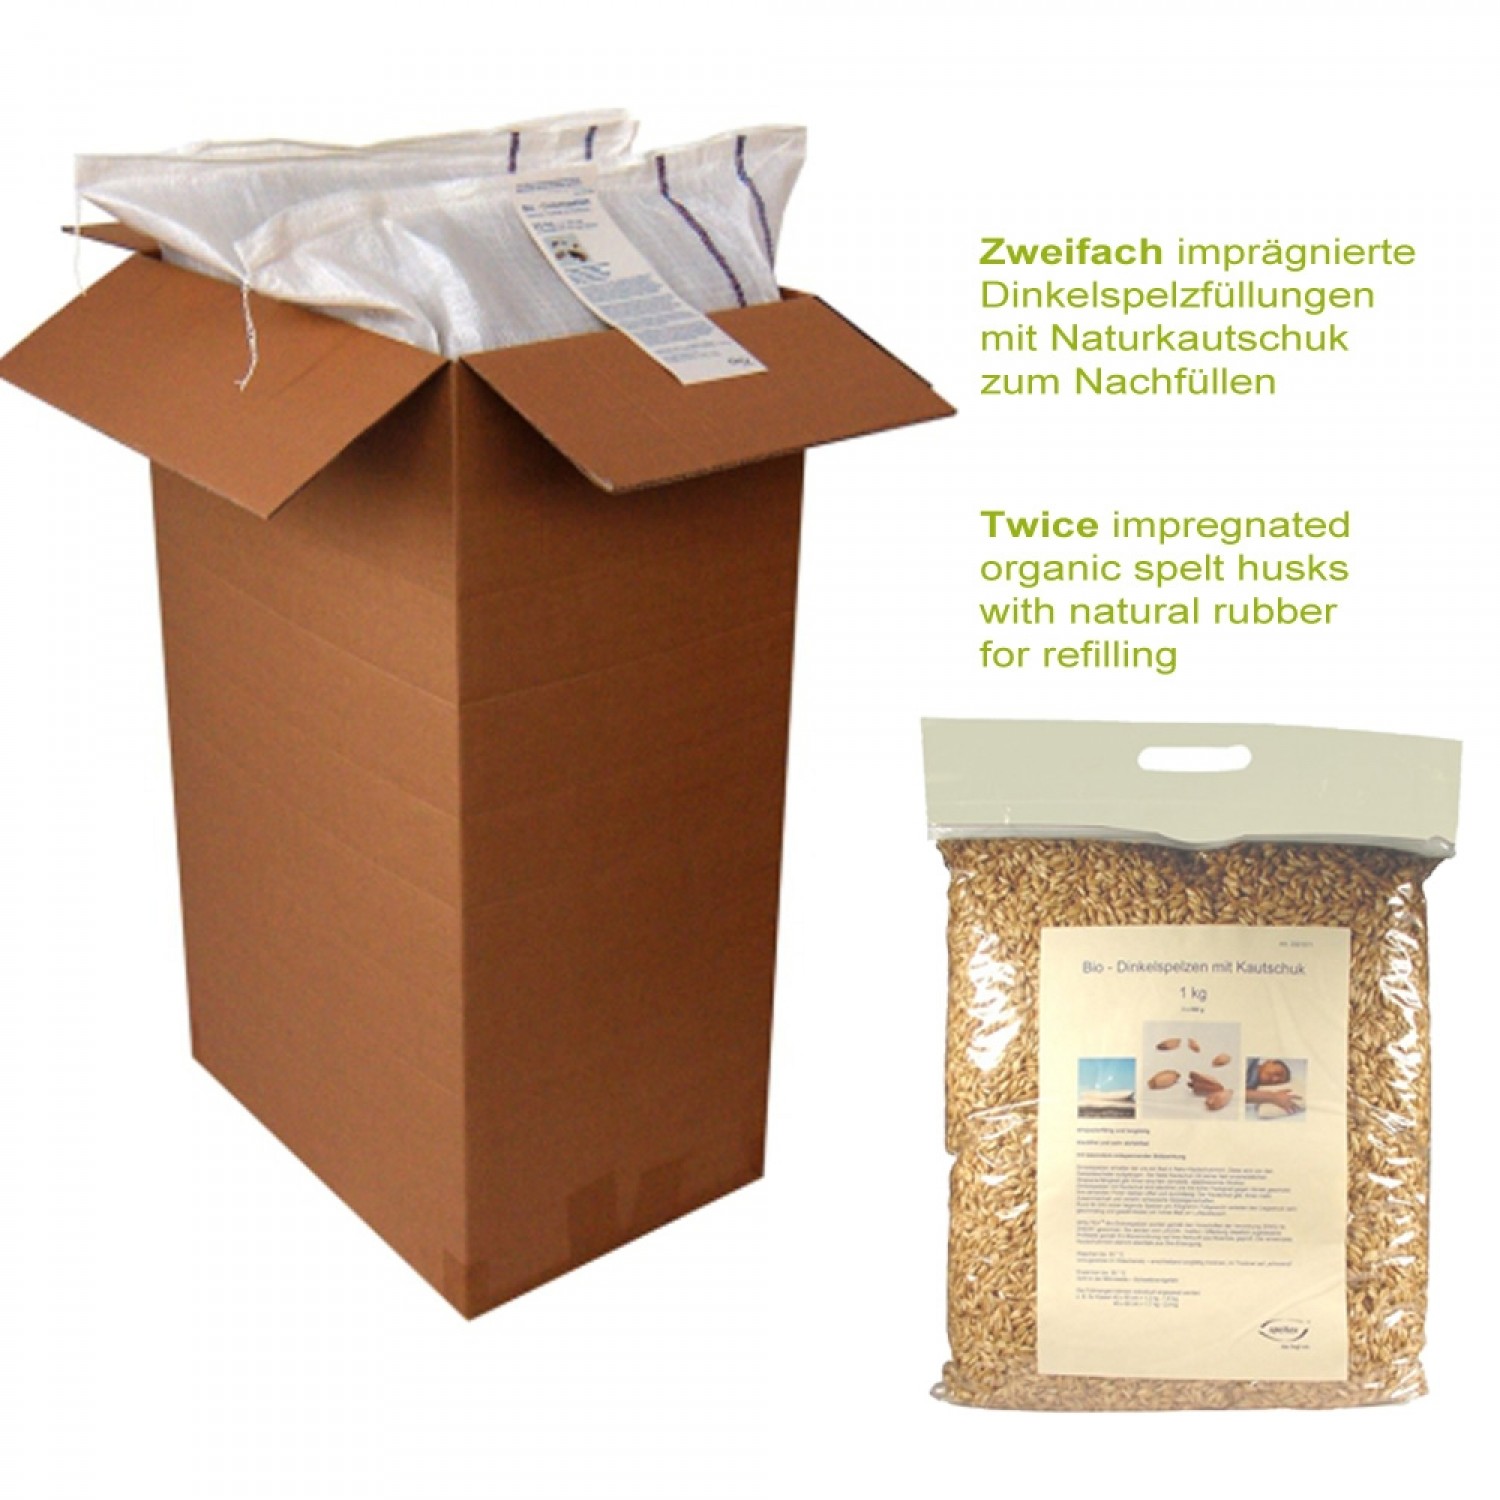 Twice impregnated organic spelt husks with natural rubber for refilling | speltex